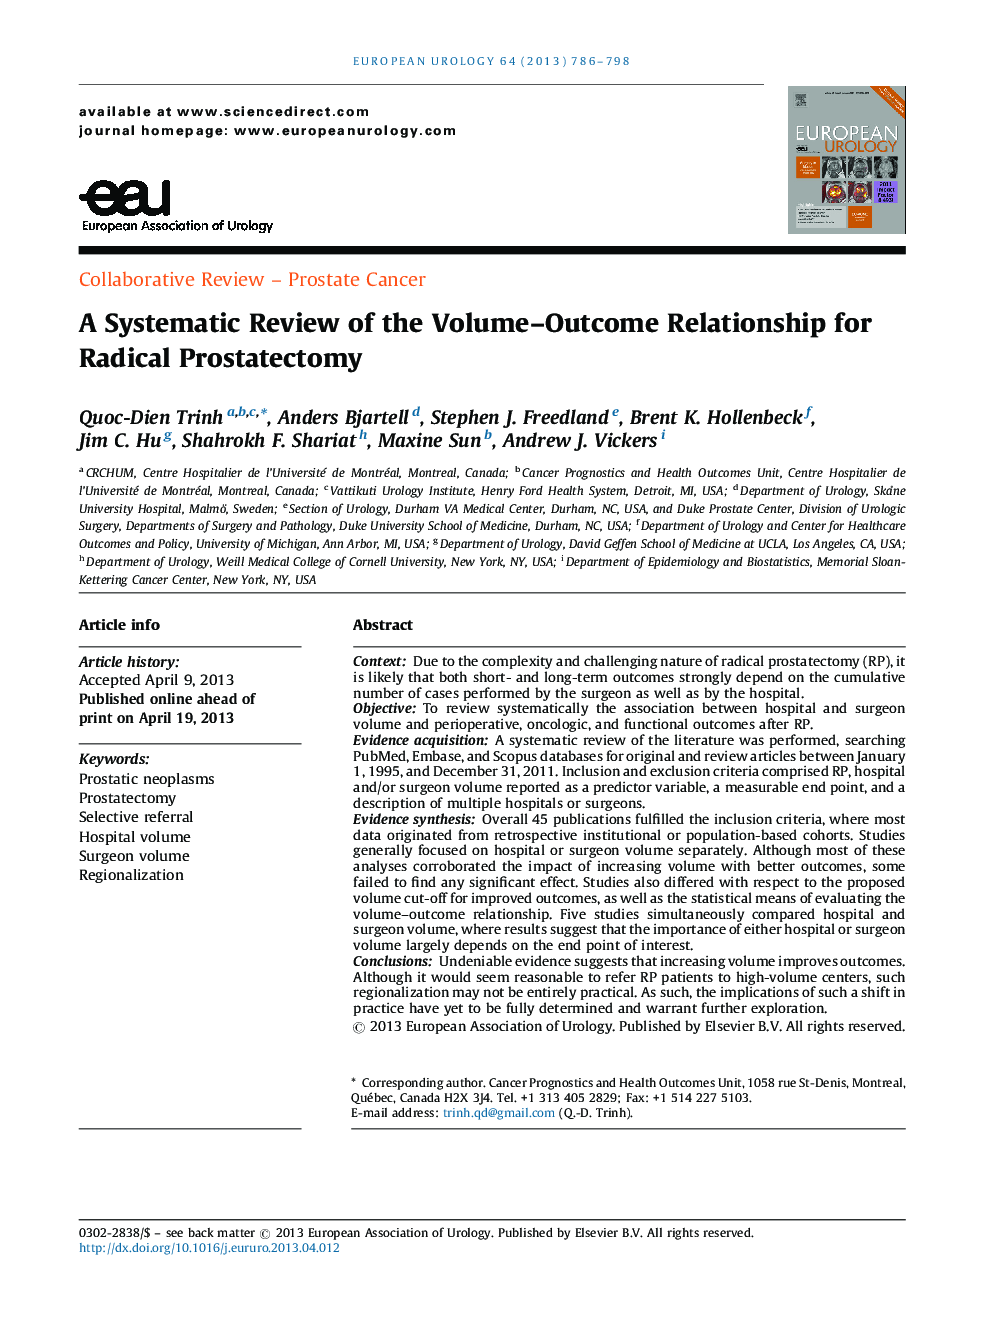 A Systematic Review of the Volume-Outcome Relationship for Radical Prostatectomy